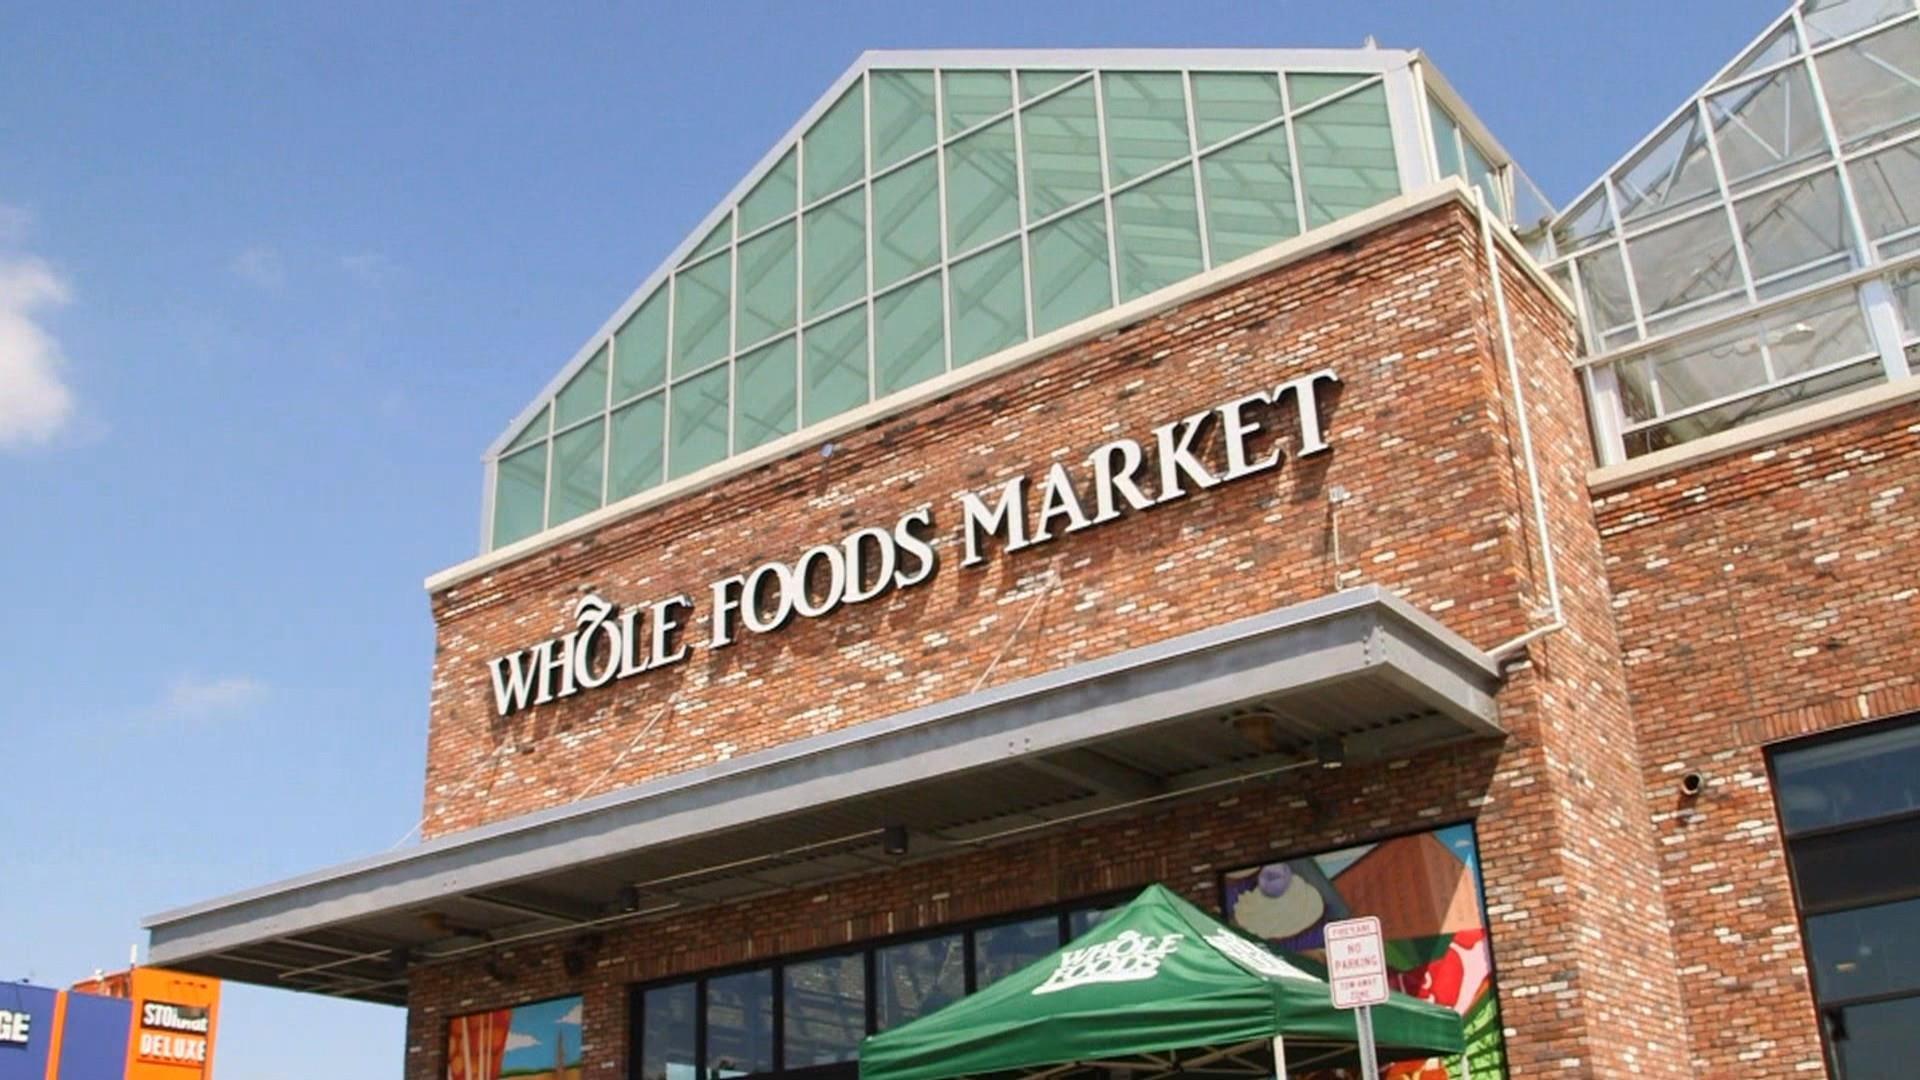  Prime Benefits at Whole Foods Market